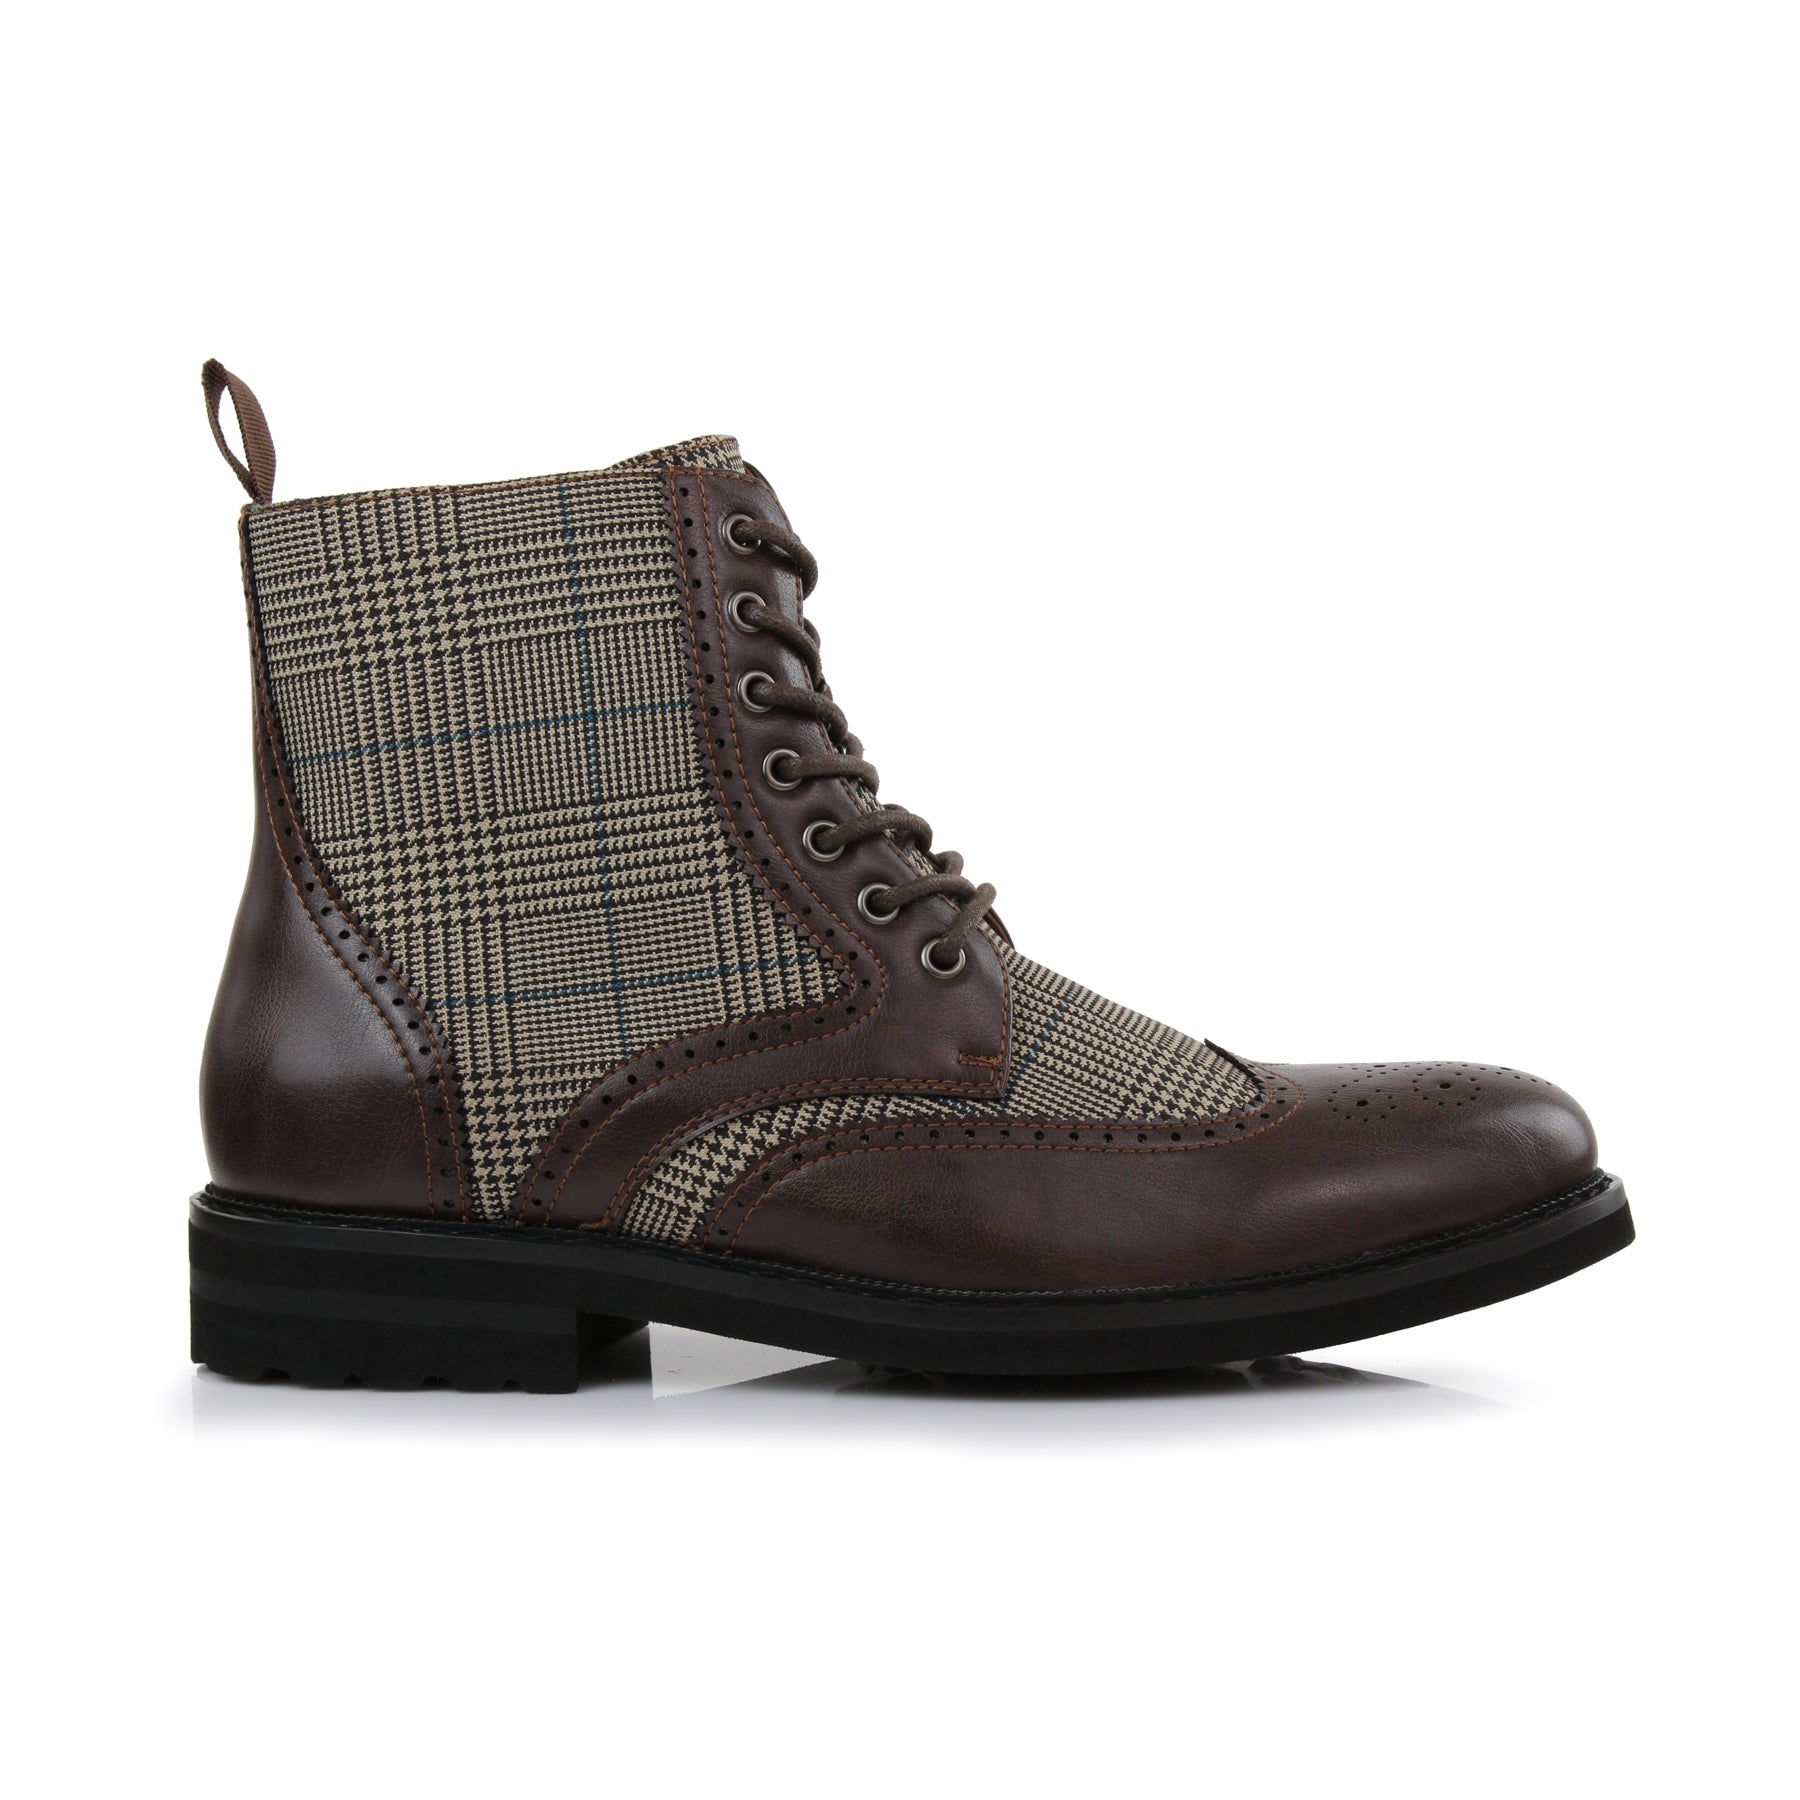 Plaid Brogue Wingtip Boots | Manchester by Polar Fox | Conal Footwear | Outer Side Angle View